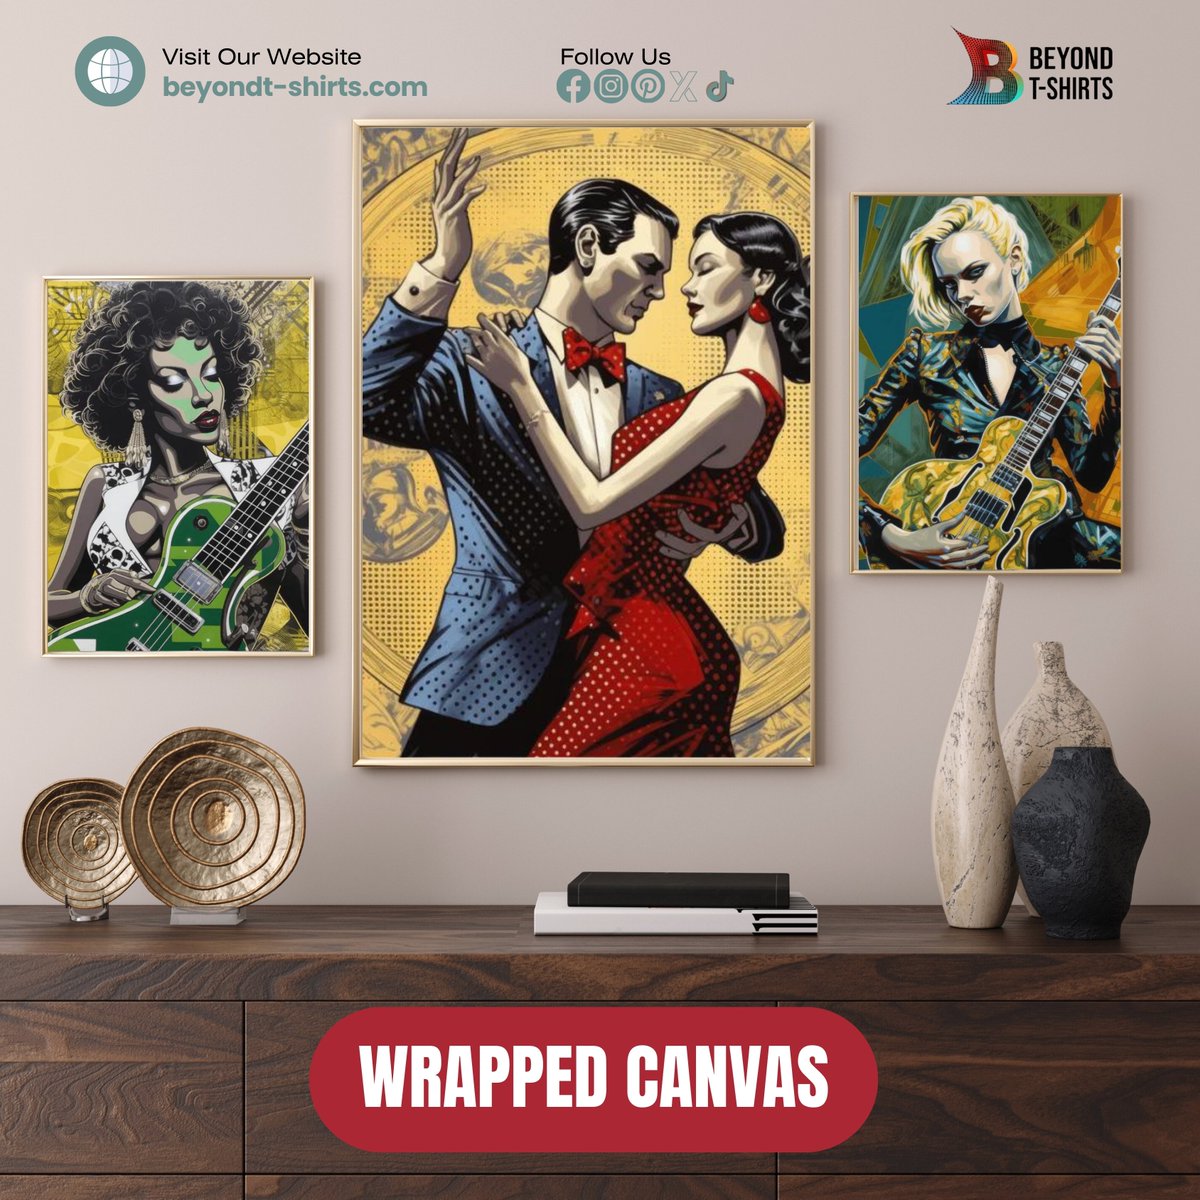 🎨 Unleash your walls’ potential with our vibrant wrapped canvases! 🎨 Dive into a world where art meets style at beyondt-shirts.com. #ArtLovers #homedecorideas